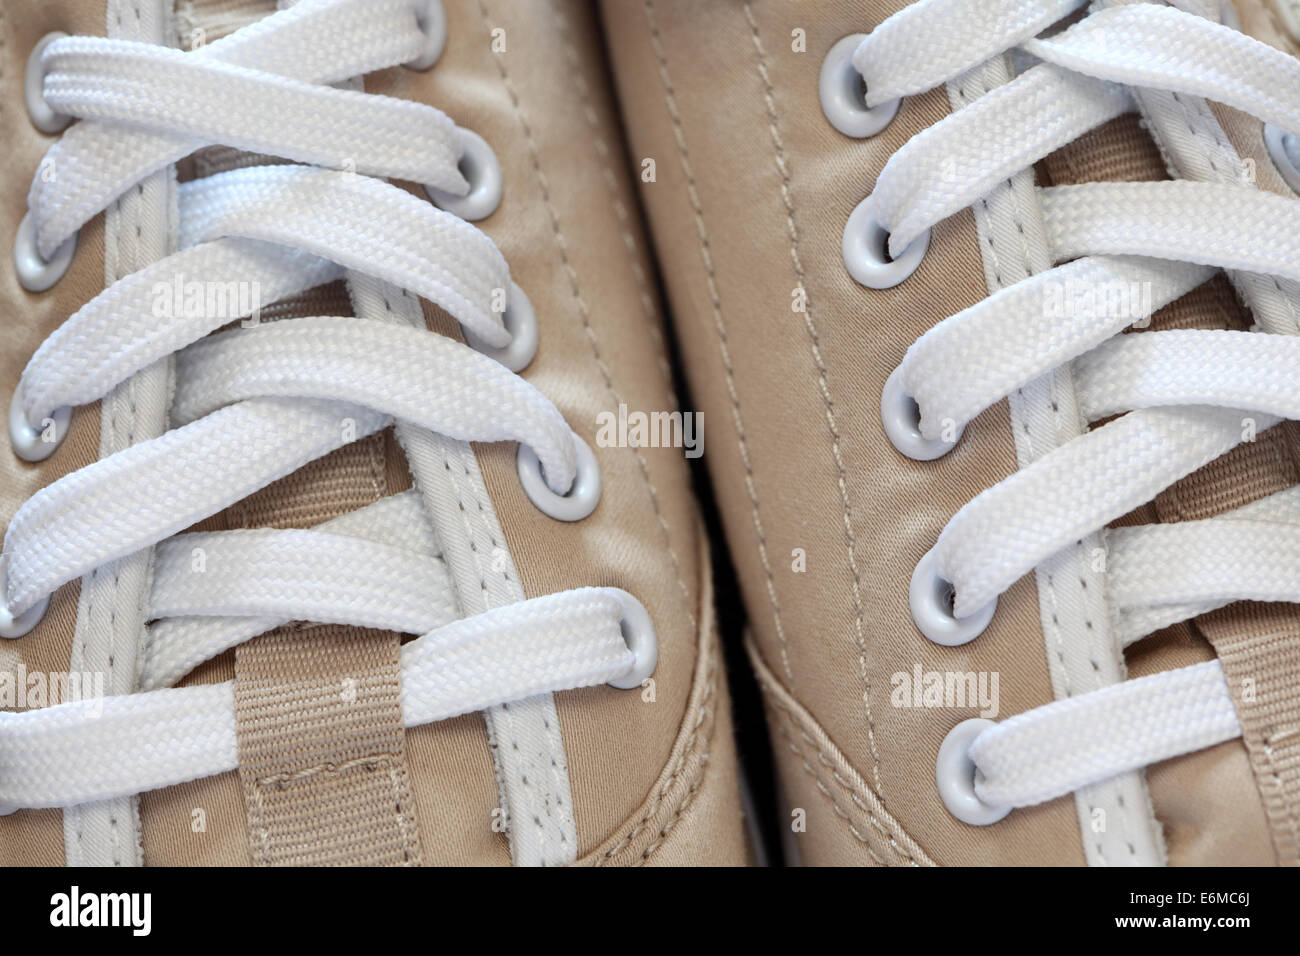 New sneaker. Focus on shoelace. Stock Photo